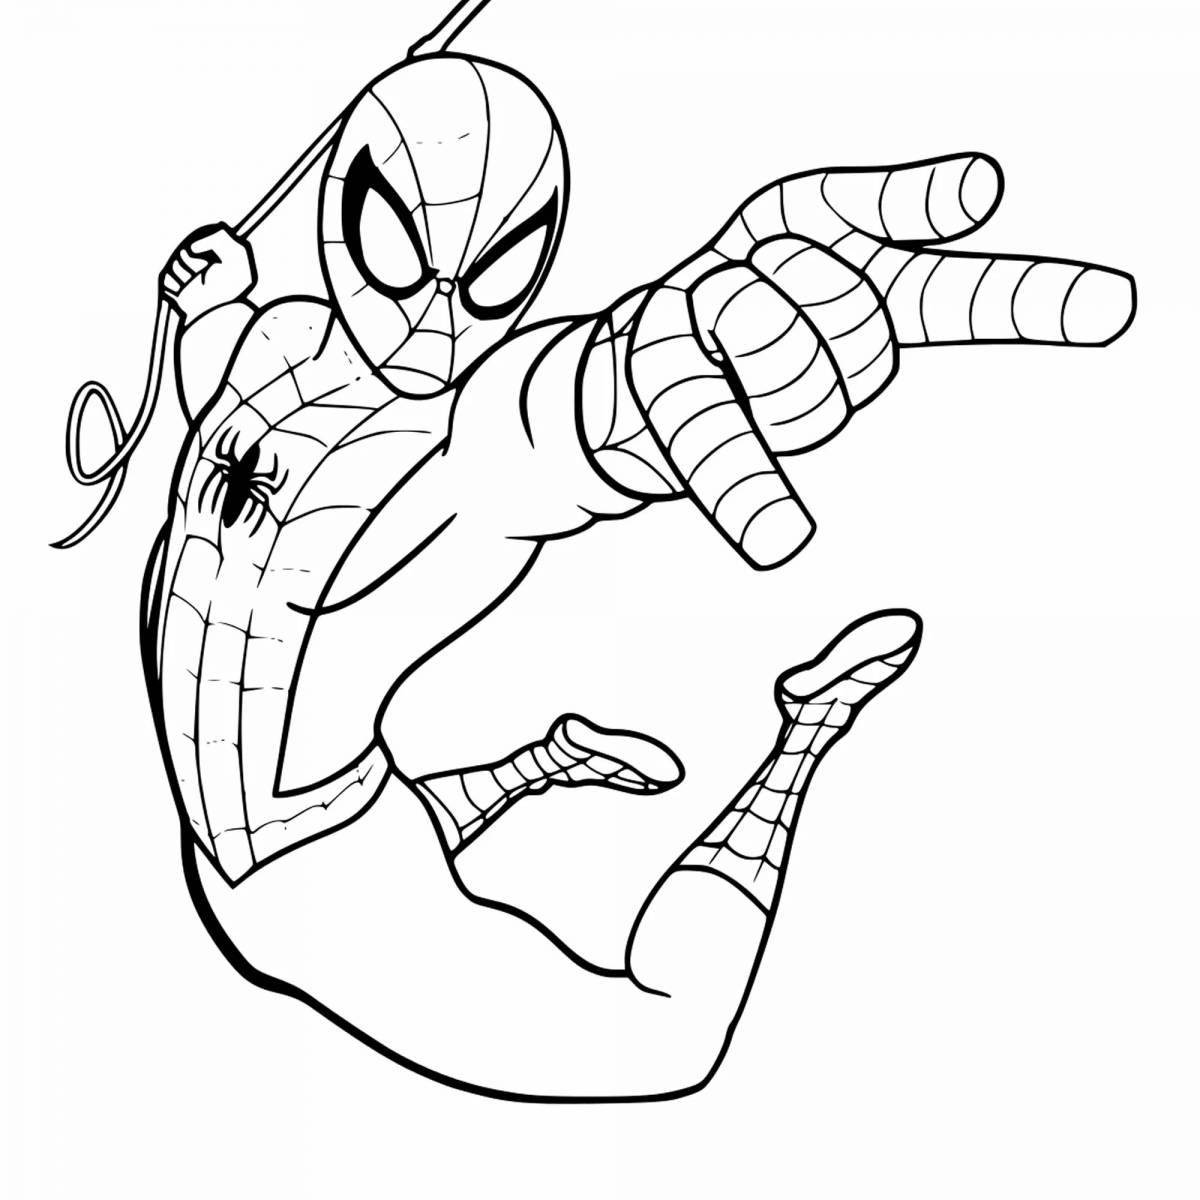 Coloring book brave spider